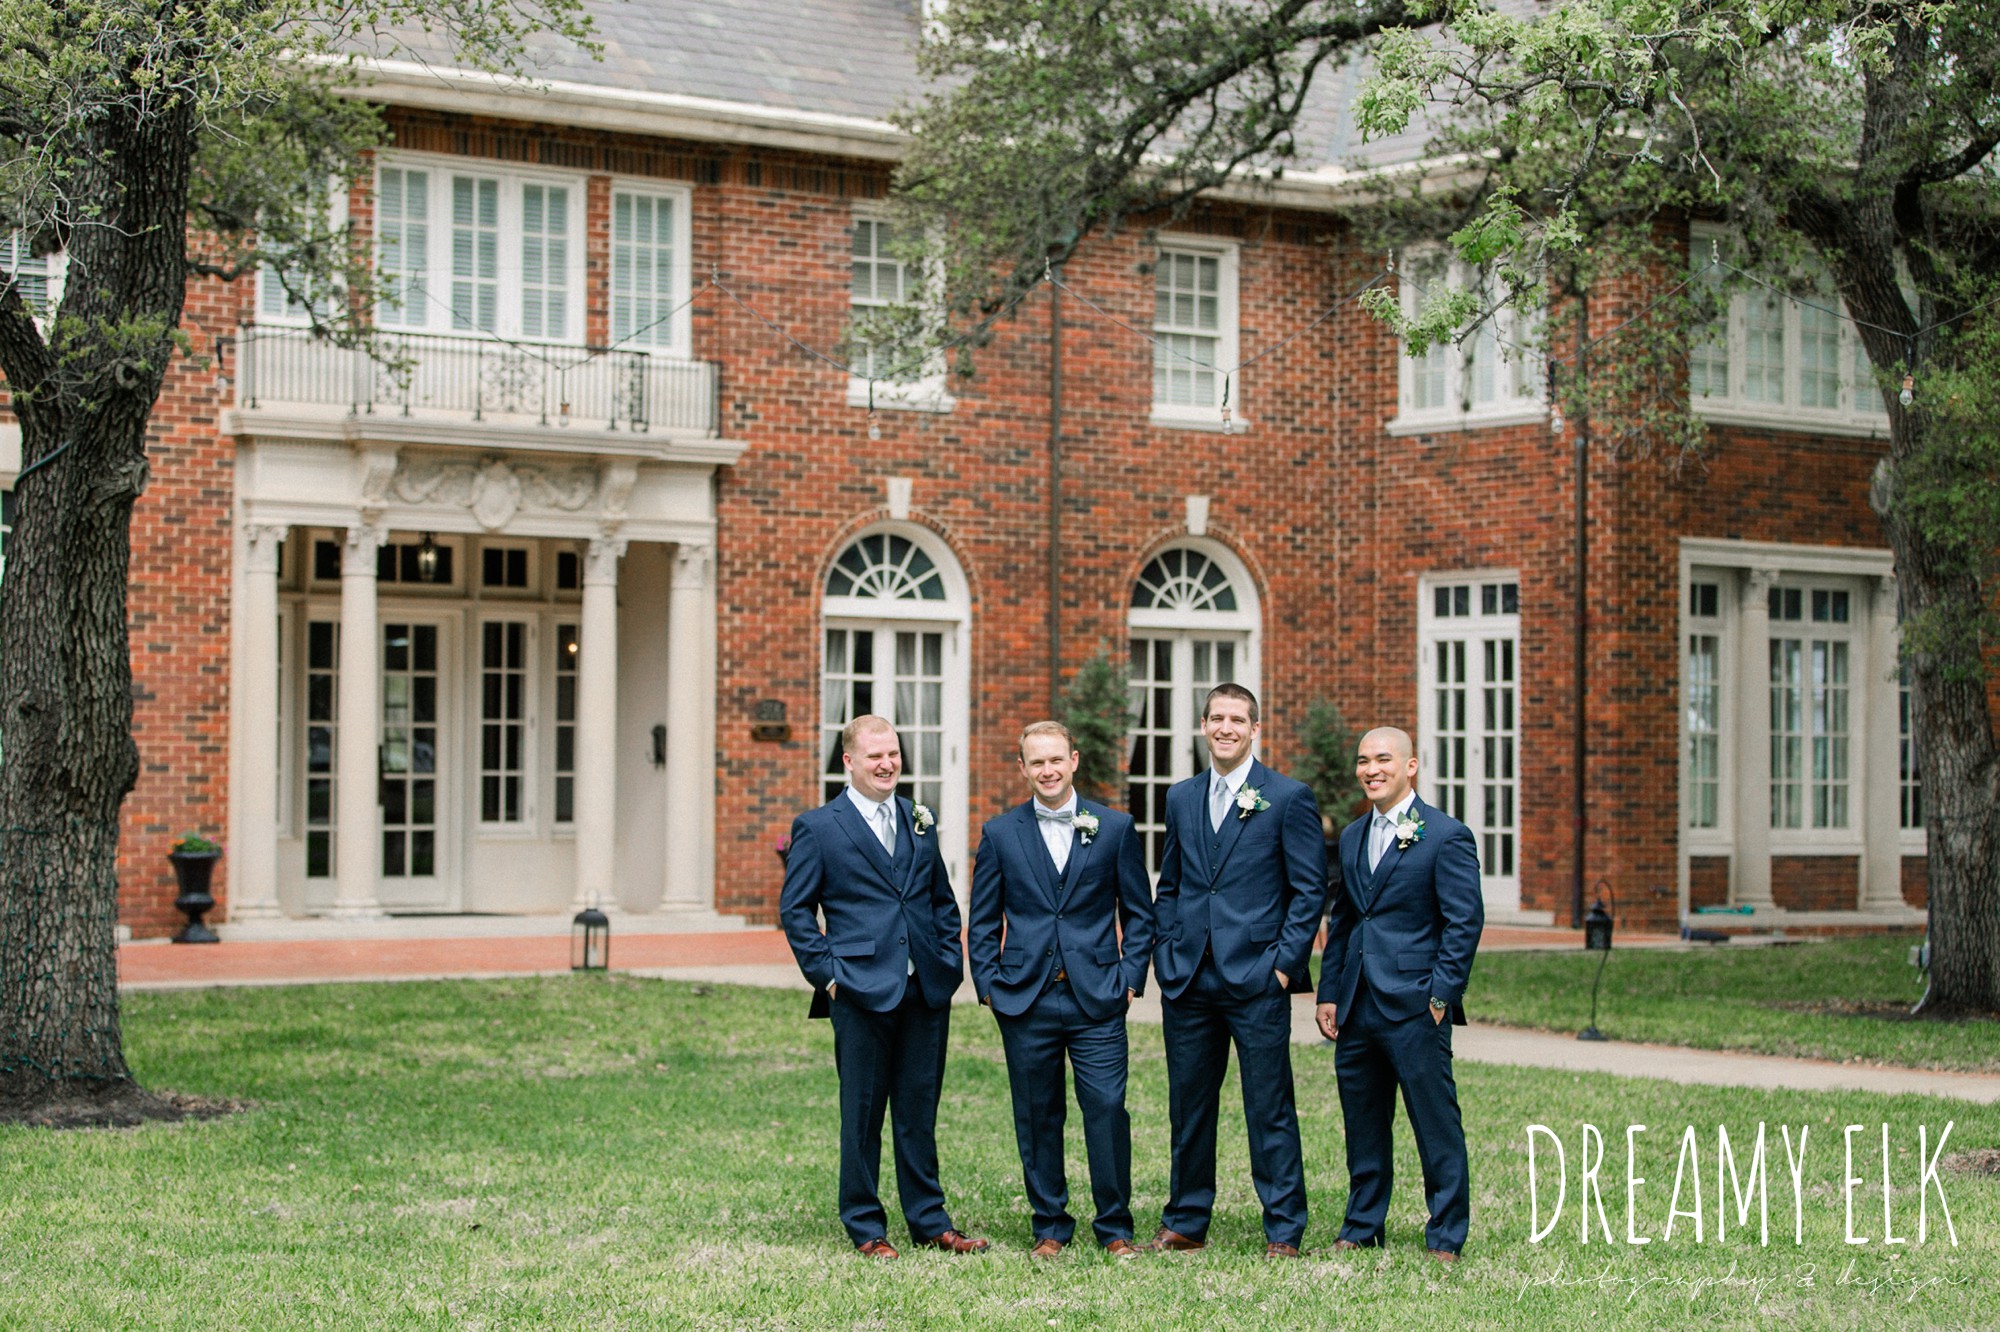 groom and groomsmen, men's wearhouse, spring wedding, the astin mansion, bryan, texas, spring wedding, dreamy elk photography and design